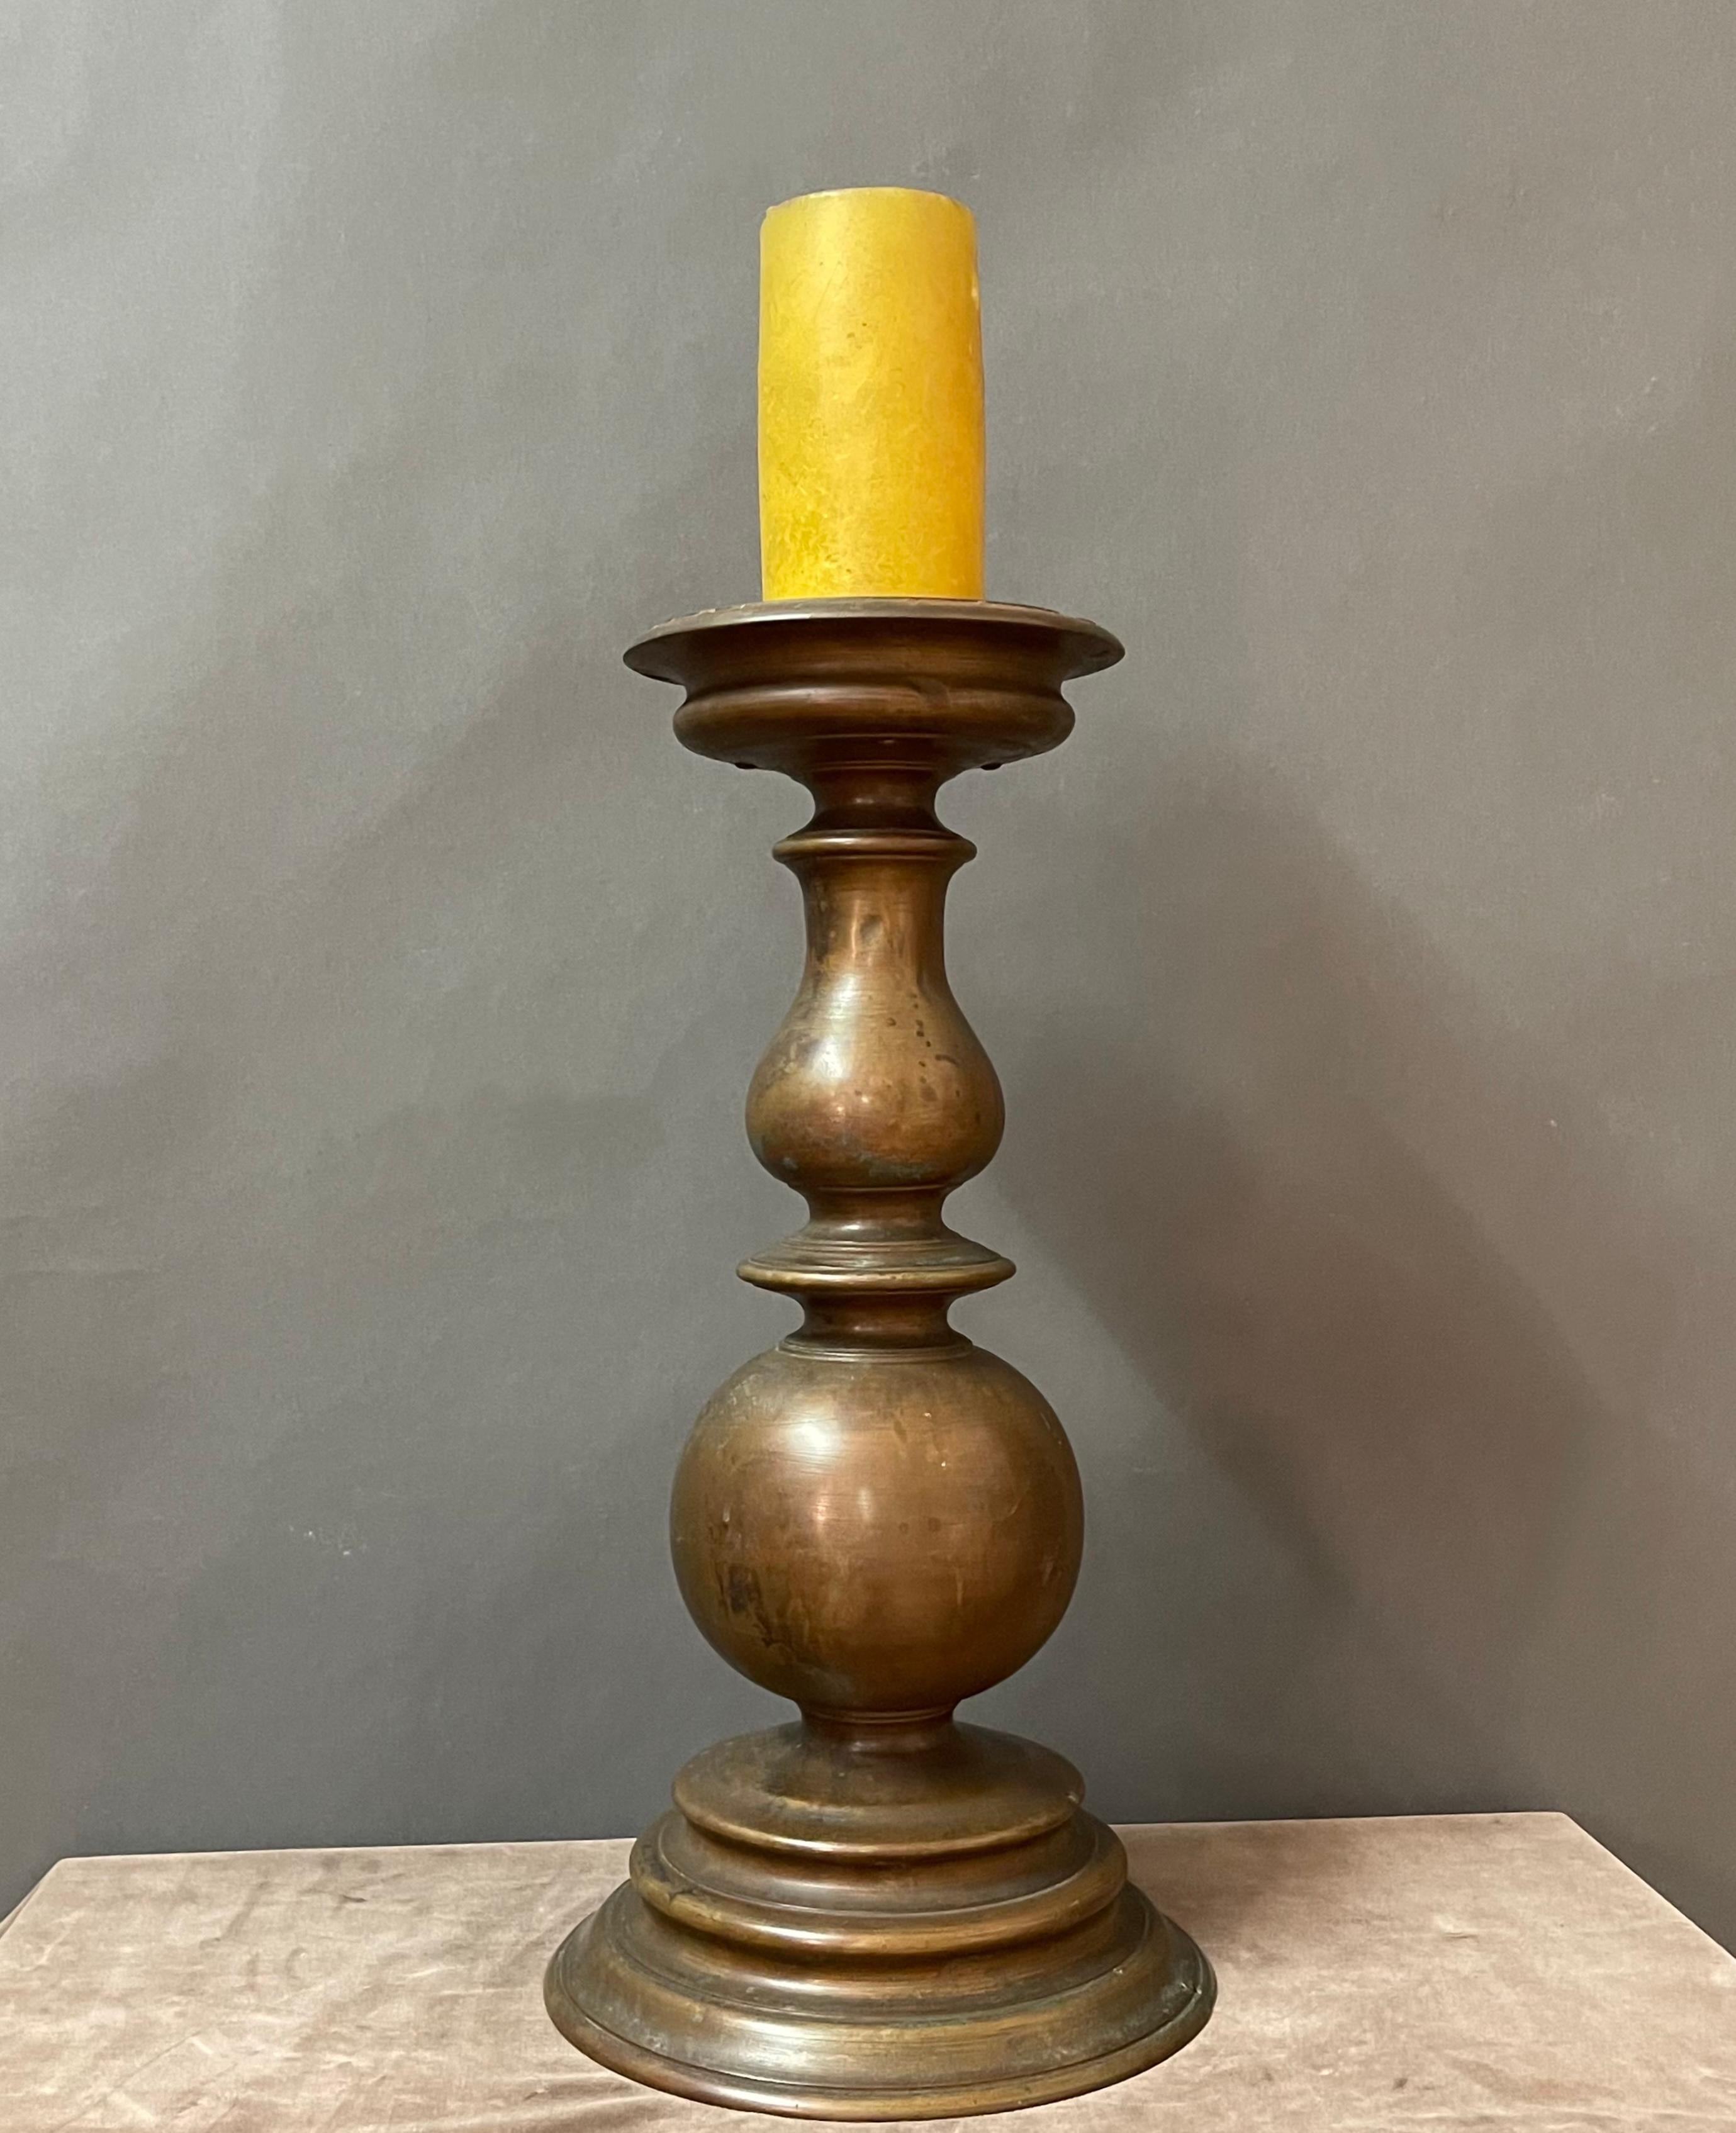 Important original and rare baroque bronze candlestick holder.
Provenance central Italy, probably Florence.

Every item of our Gallery, upon request, is accompanied by a certificate of authenticity issued by Sabrina Egidi official Expert in